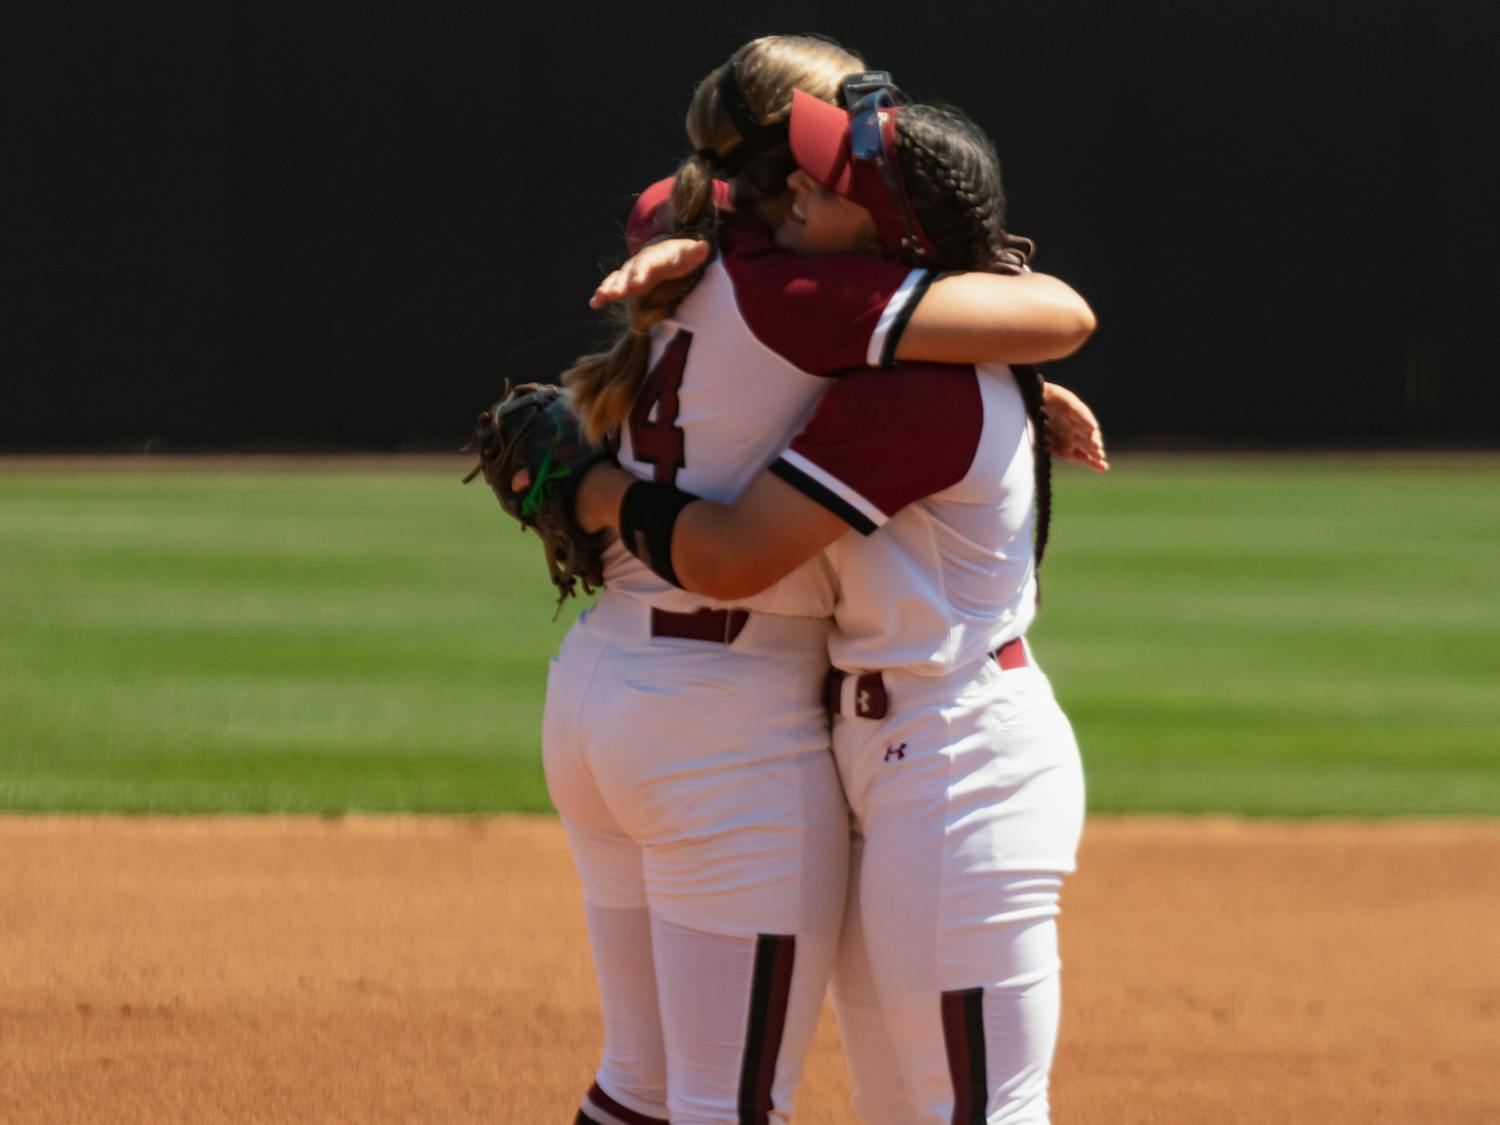 Sophomore infielder Emma Sellers and fifth-year catcher and infielder Jordan Fabian hug before the start of the first game against Charleston Southern at Beckham Field on April 19, 2023. The Gamecocks beat the Buccaneers 5-0 and went on to sweep the doubleheader with an 11-2 victory later in the day.&nbsp;